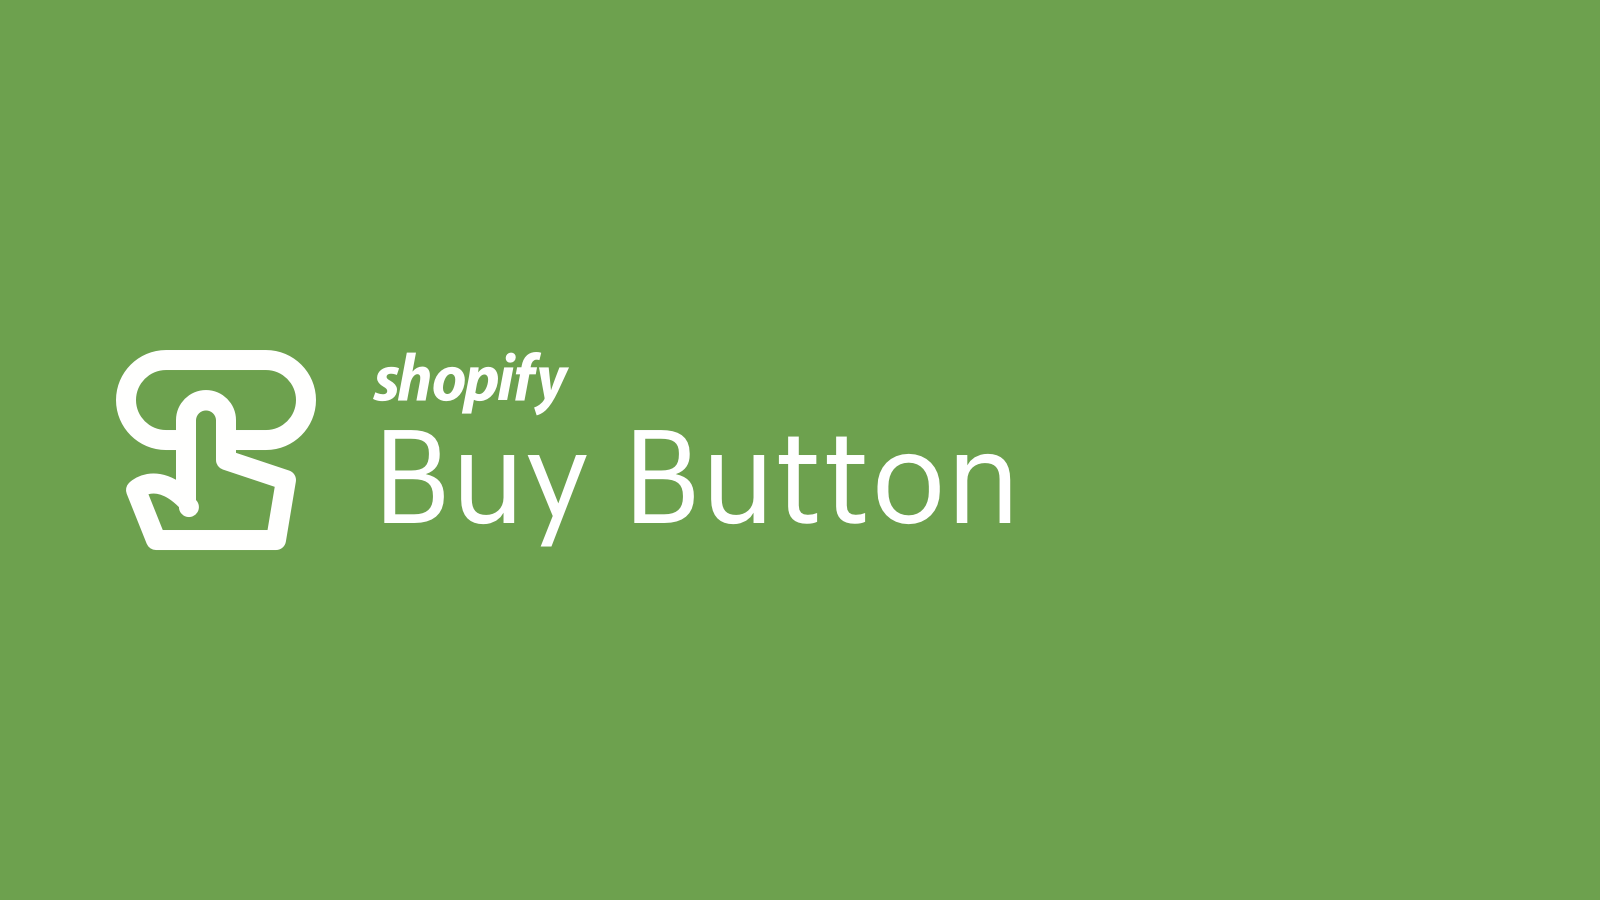 Sell channel. Buy button. Buy on Amazon button Shopify.